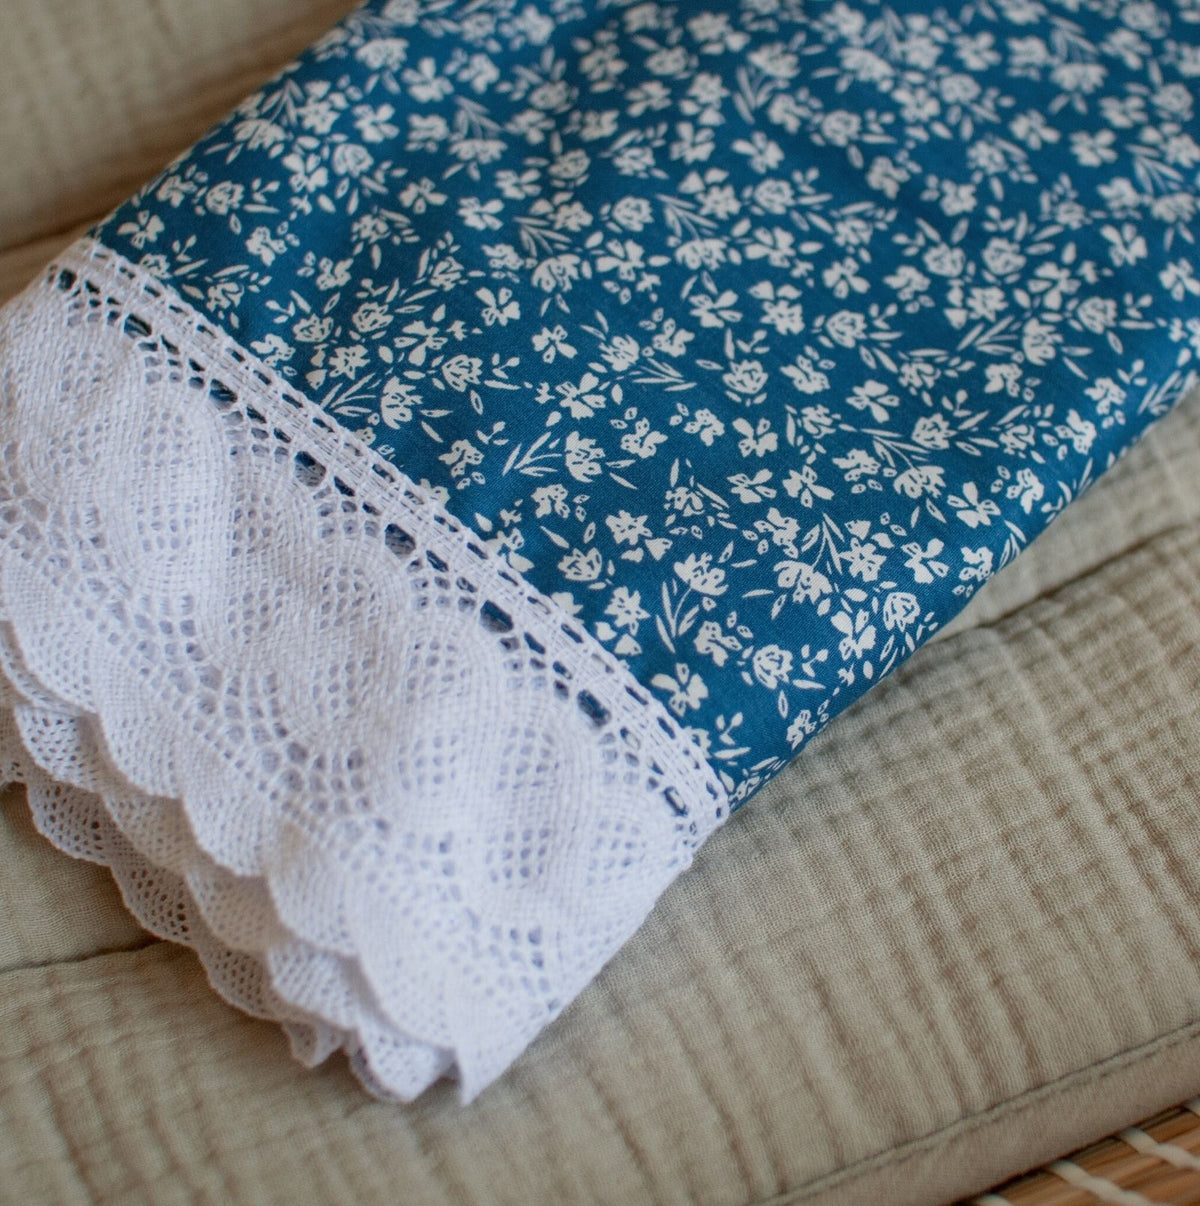 Navy blue floral baby blanket with a lace edging for a keepsake of heirloom